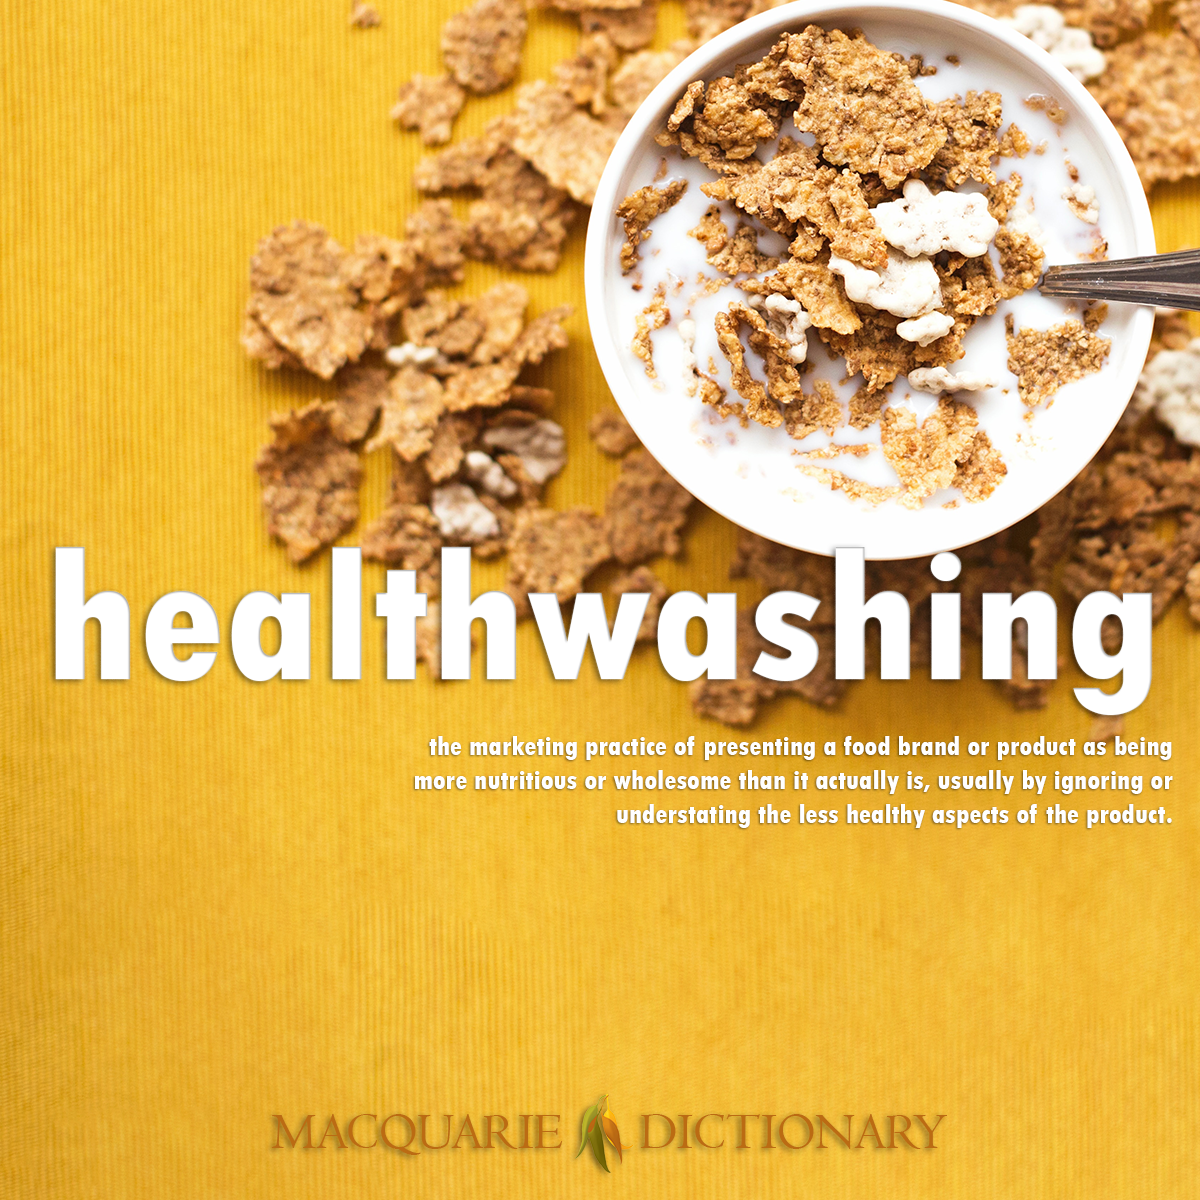 Image of Macquarie Dictionary Word of the Year healthwashing the marketing practice of presenting a food brand or product as being more nutritious or wholesome than it actually is, usually by ignoring or understating the less healthy aspects of the product.